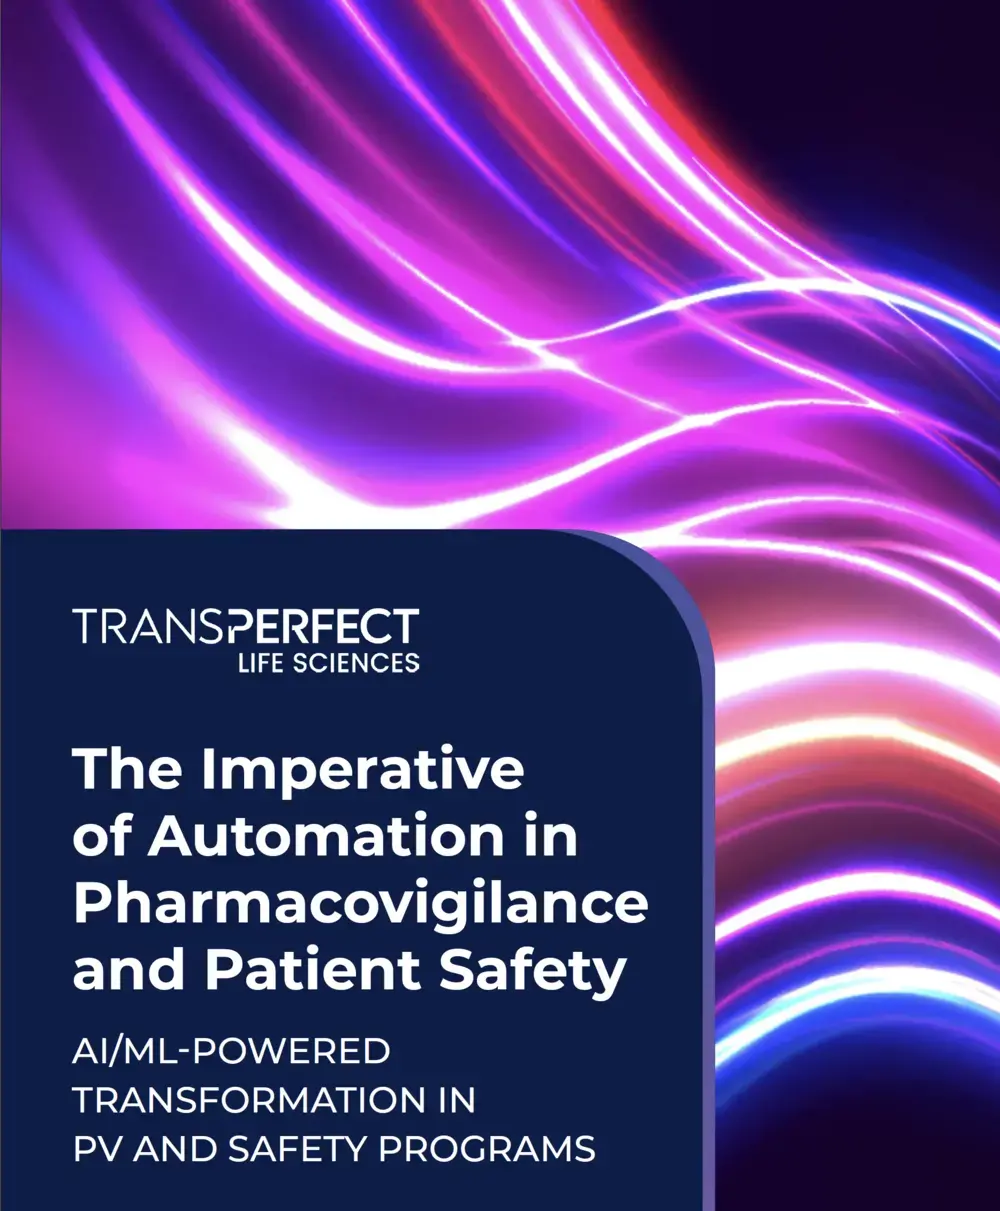 The Imperative of Automation in Pharmacovigilance and Patient Safety